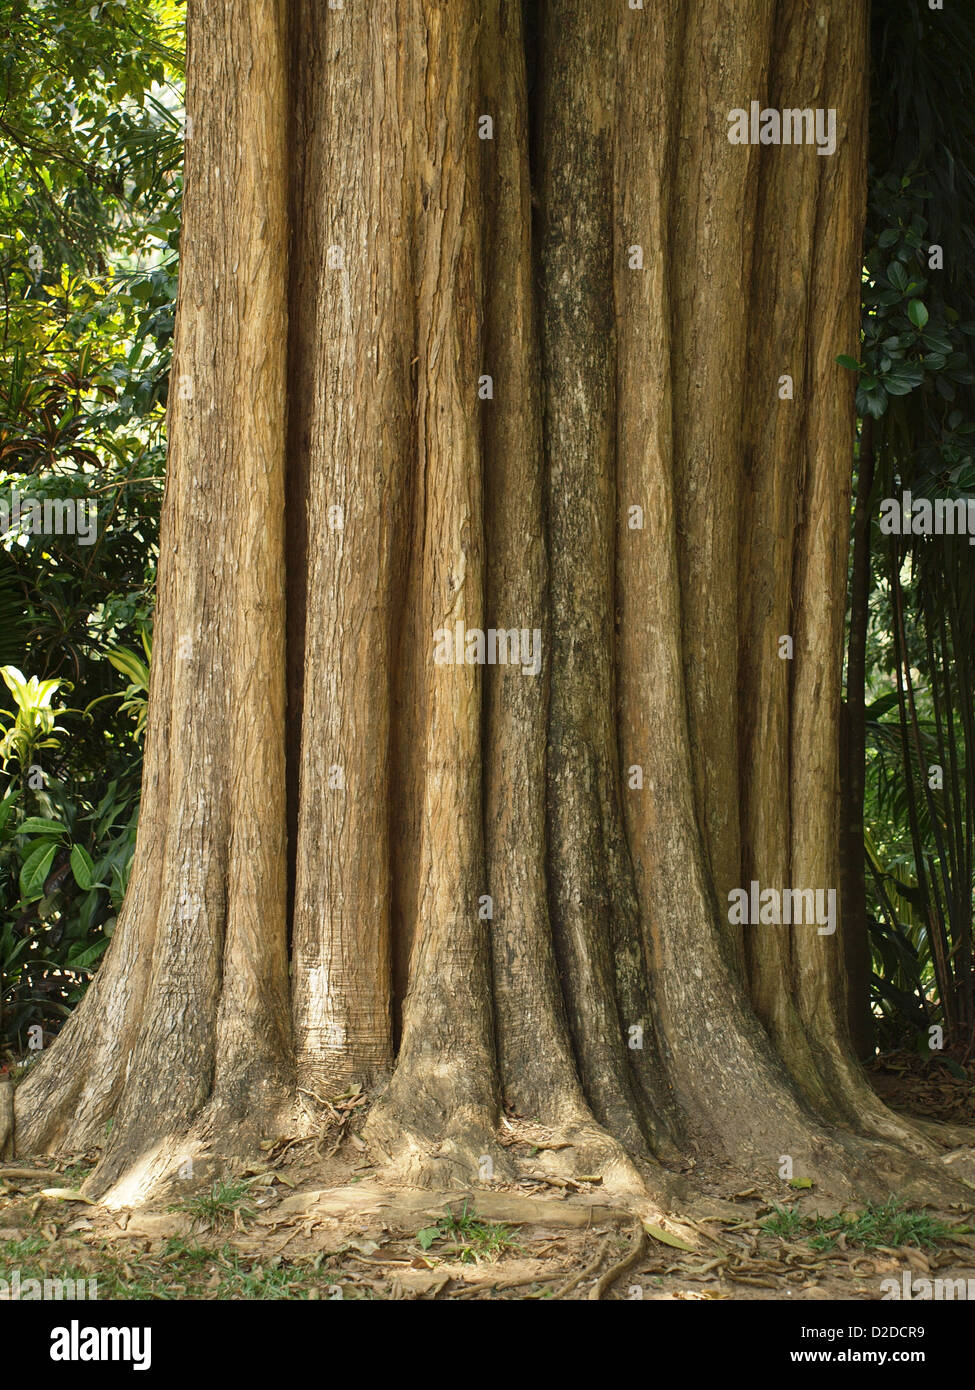 massive fluted tree trunk of tropical hardwood species in Sri Lanka with flared root structure Stock Photo